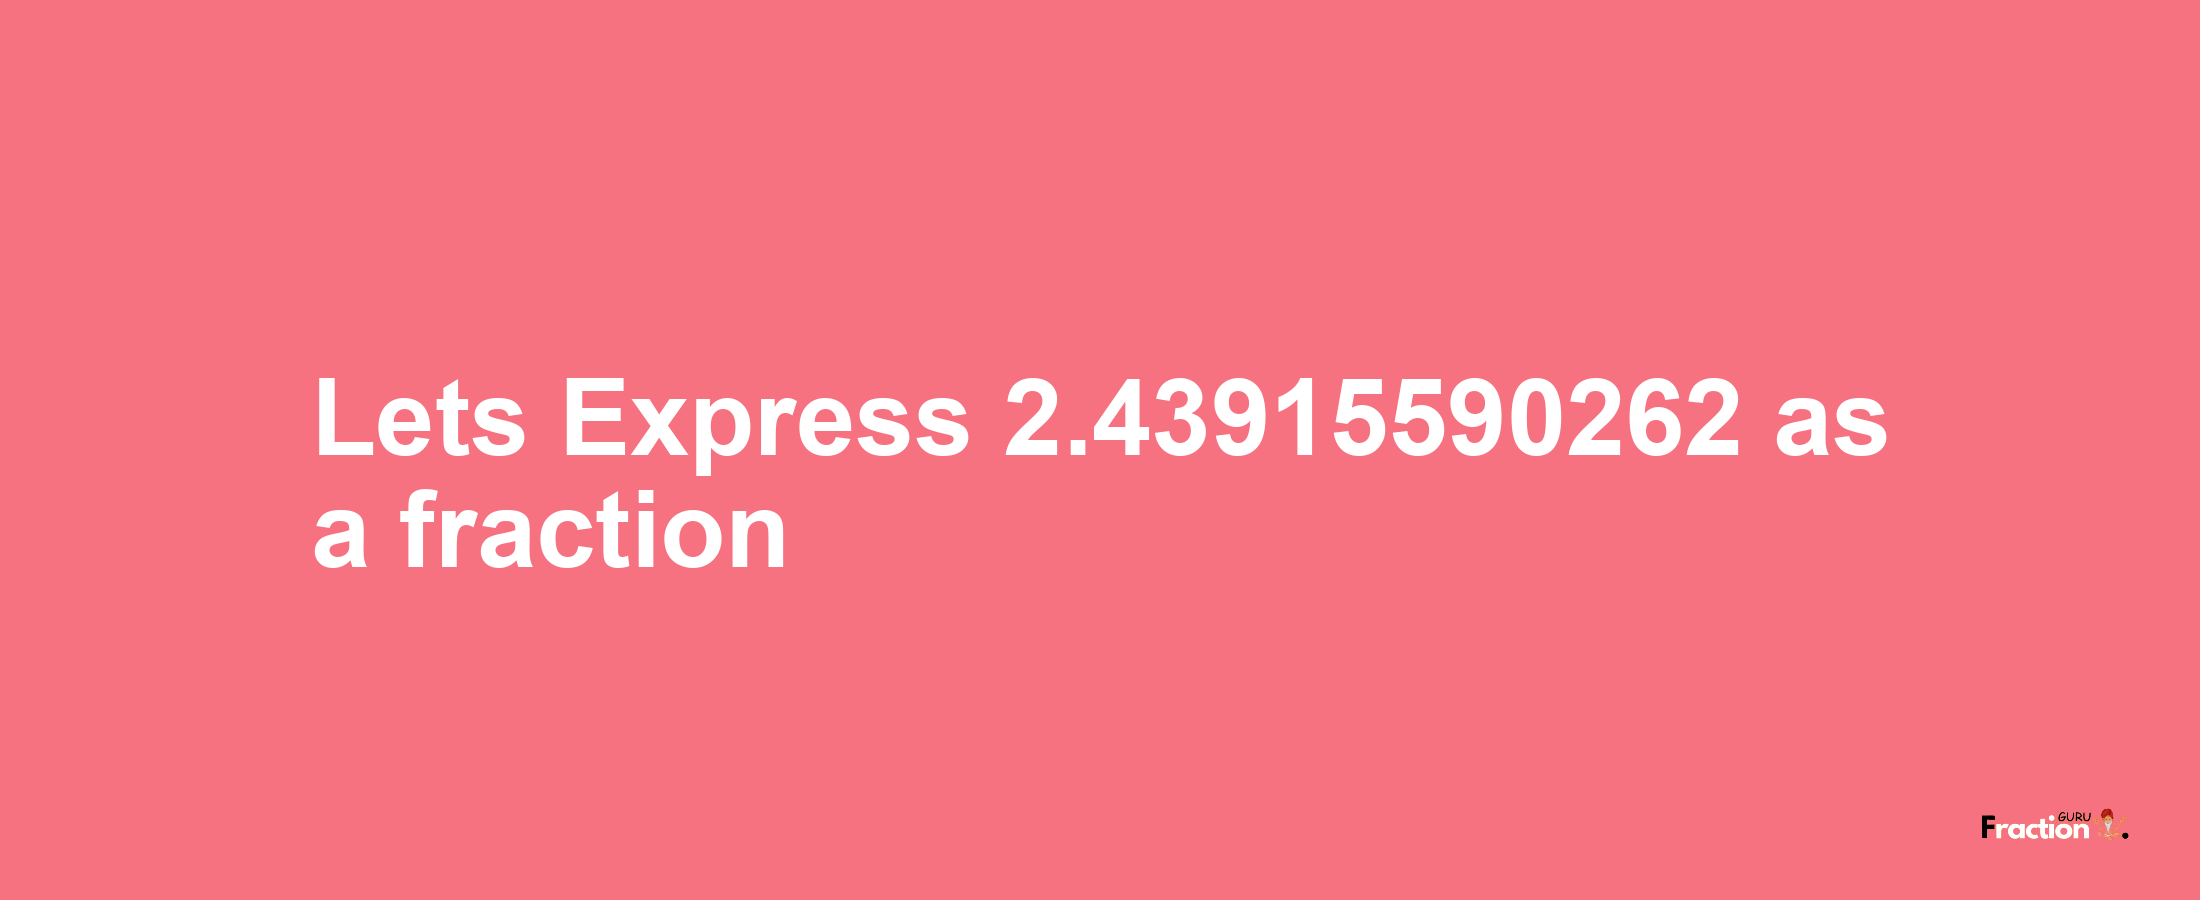 Lets Express 2.43915590262 as afraction